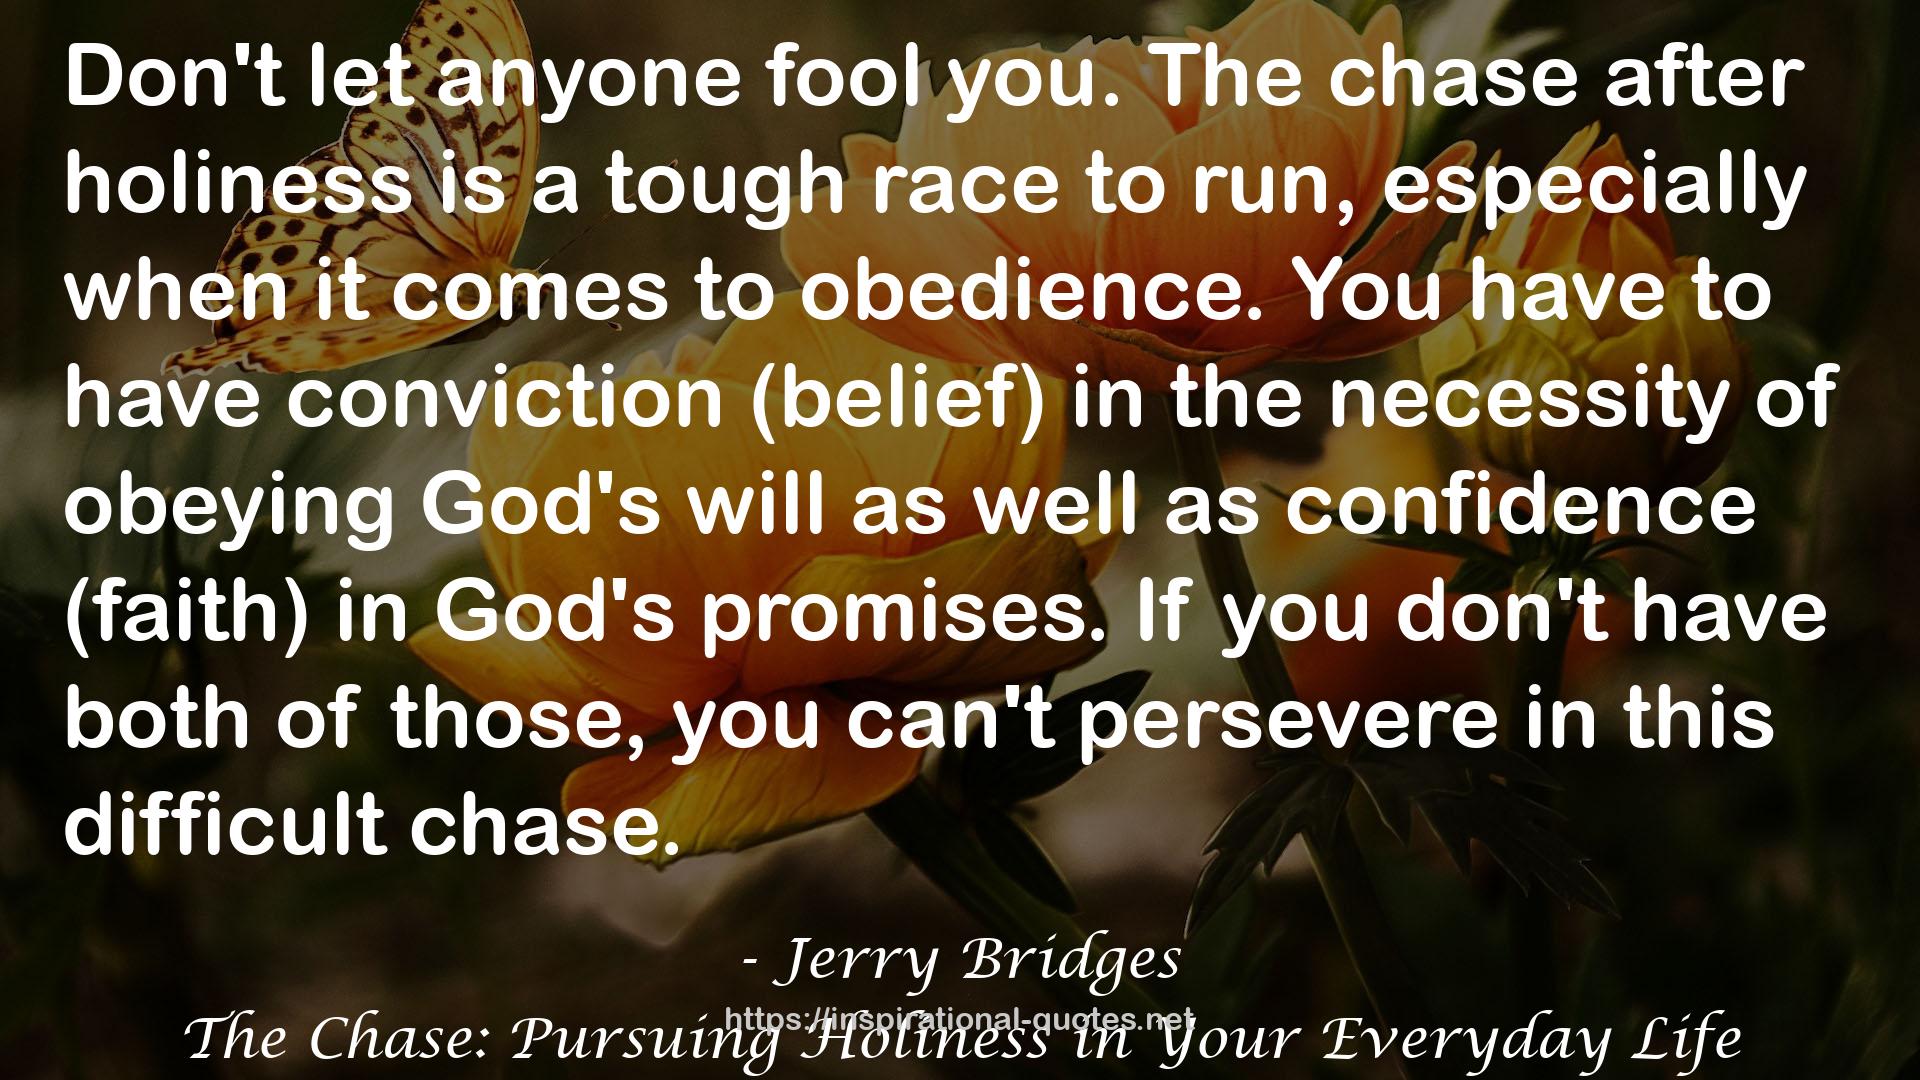 The Chase: Pursuing Holiness in Your Everyday Life QUOTES